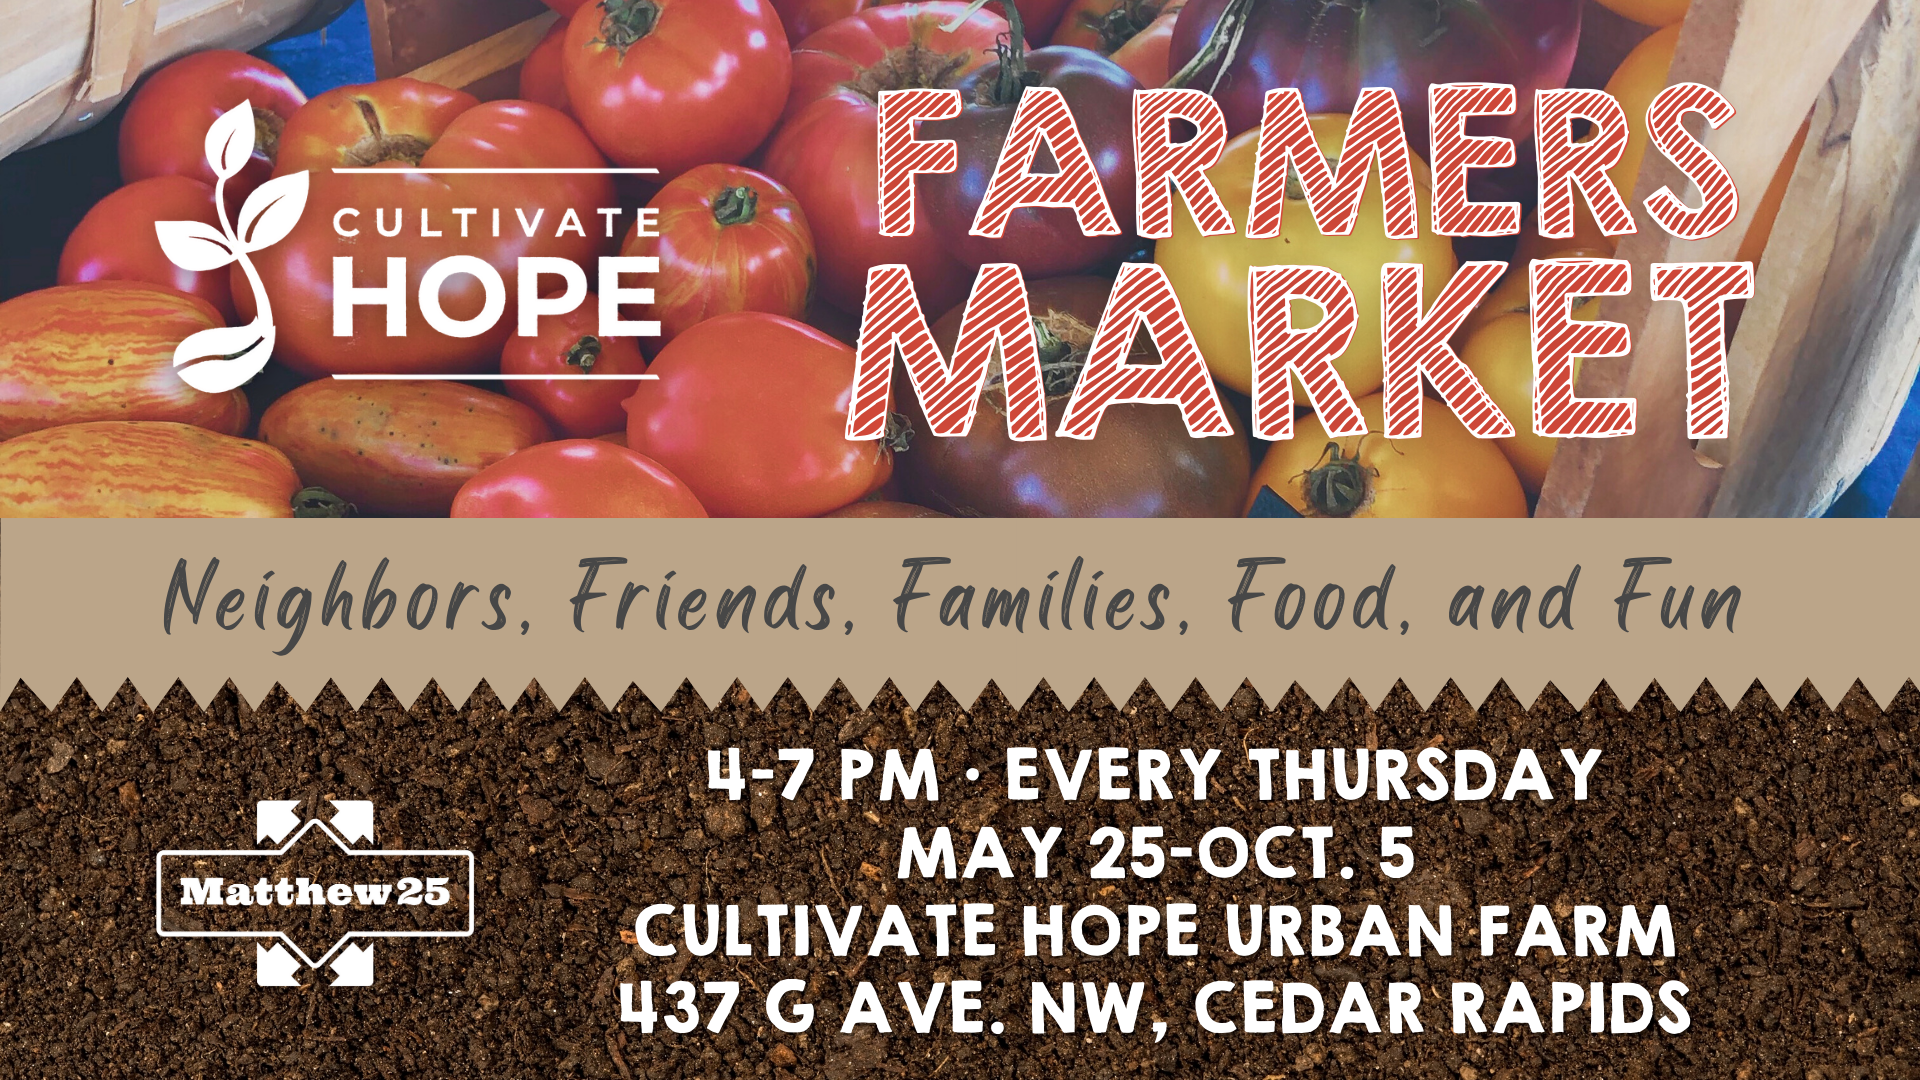 Cultivate Hope Farmers Market at the urban farm in cedar rapids, may 25-oct. 5